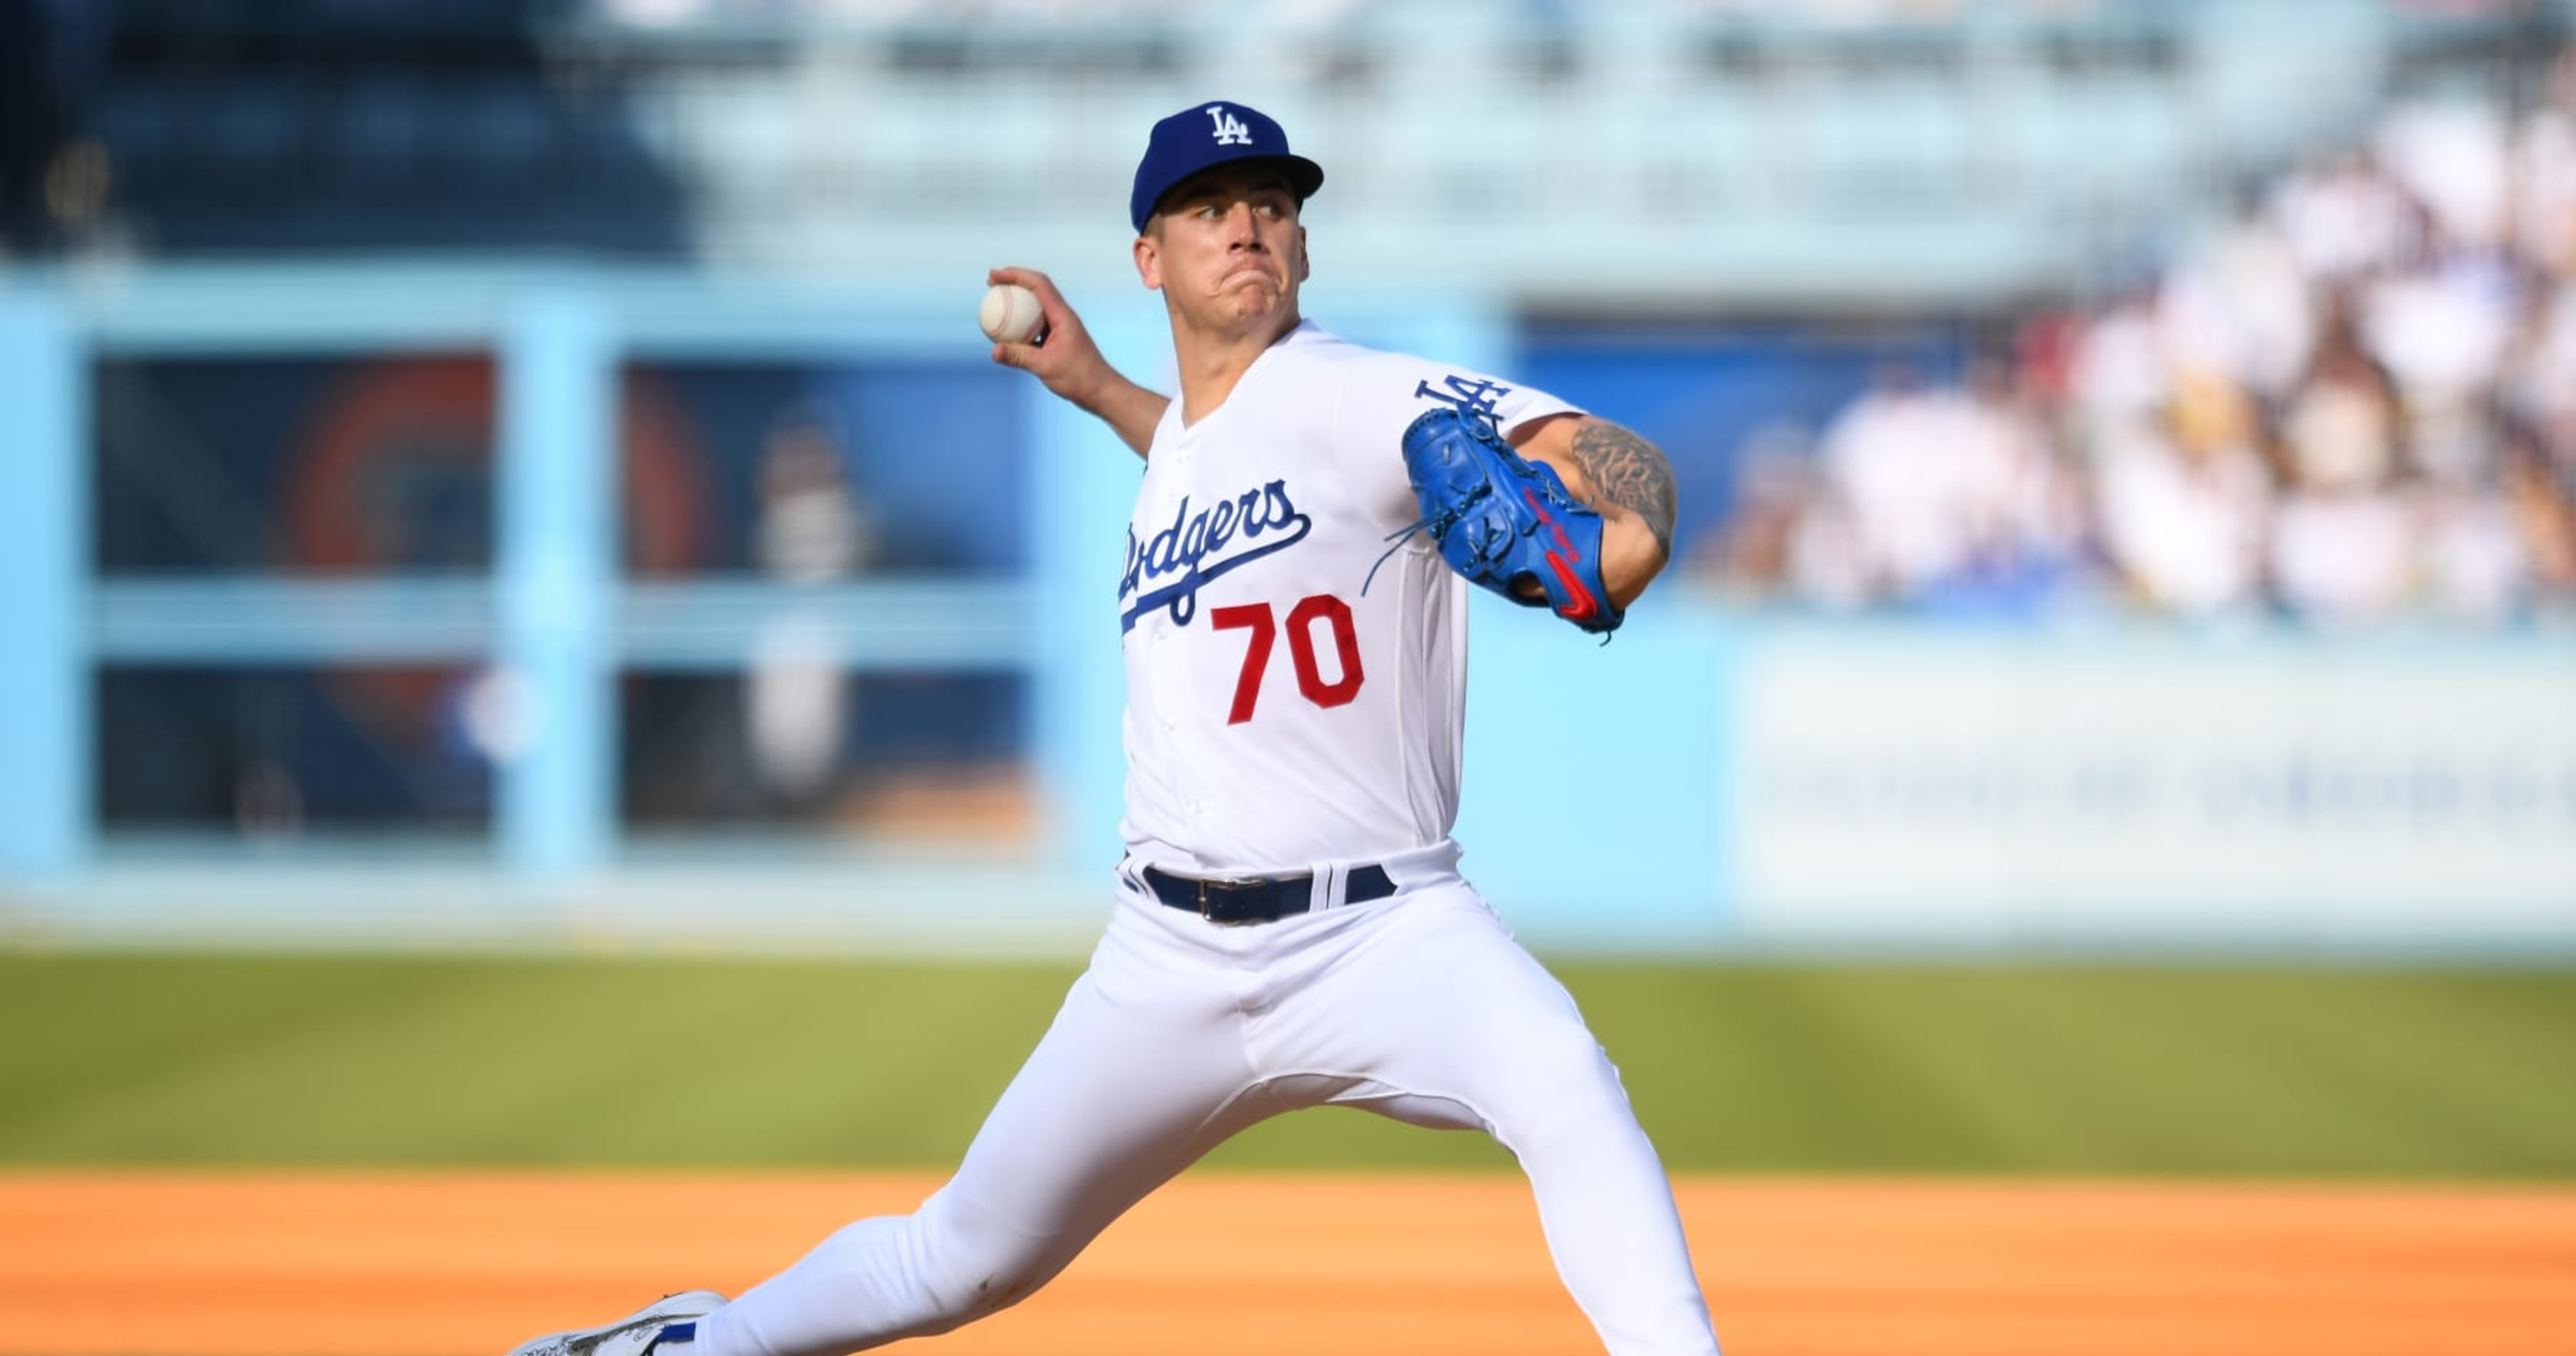 Dodgers top prospect Diego Cartaya will get playing time in spring